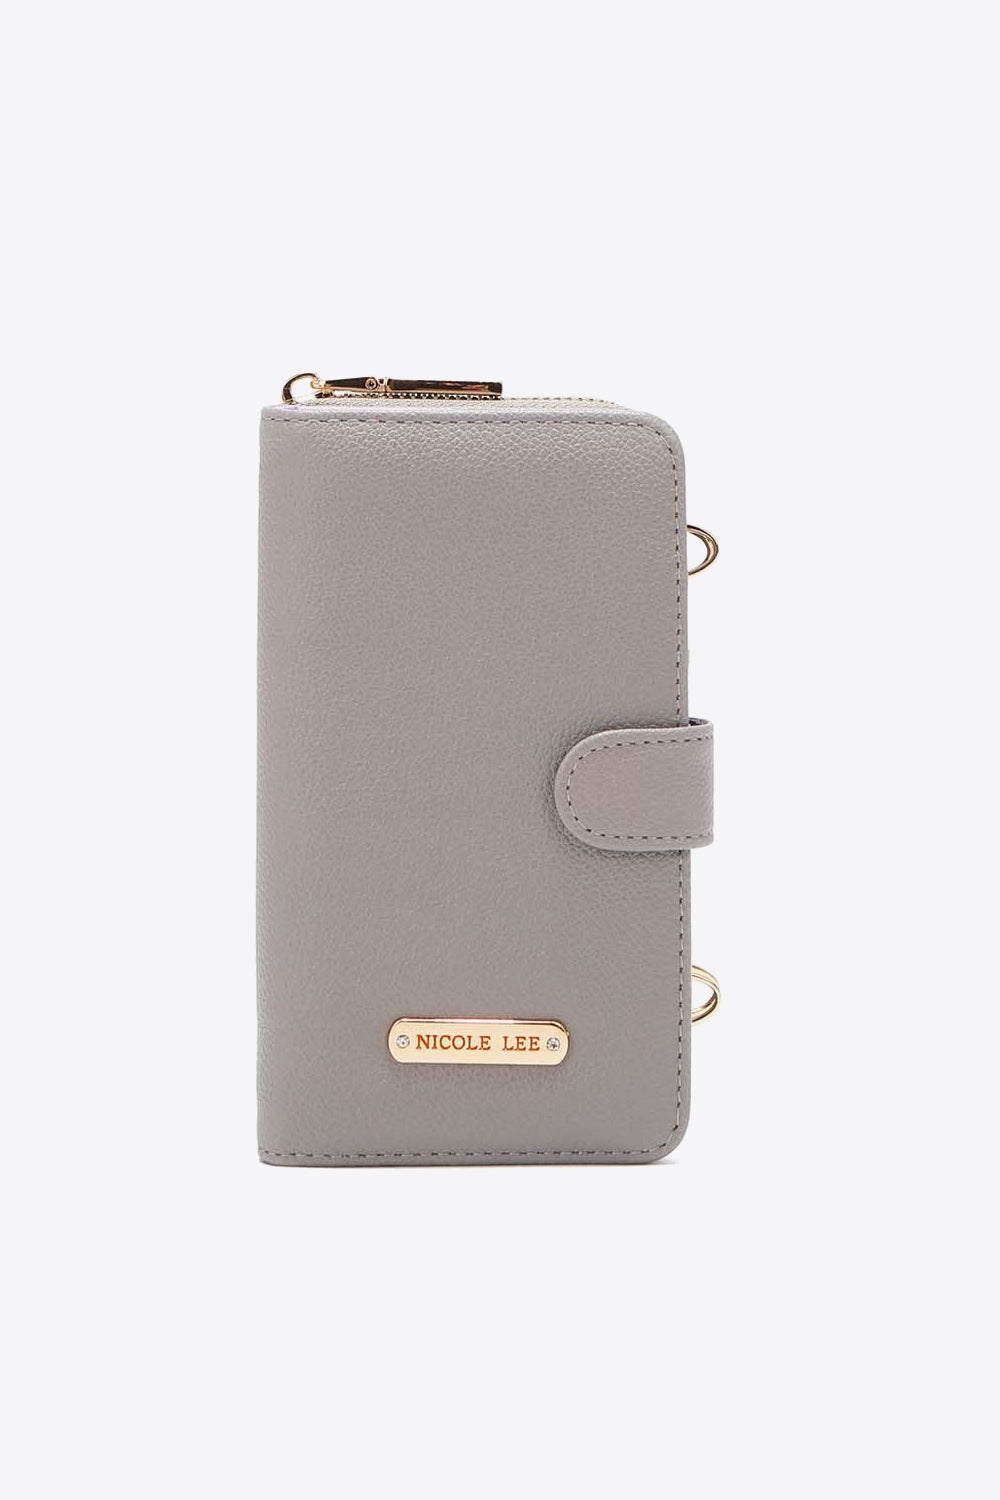 Jemma Two-Piece Crossbody Phone Case Wallet in an Assortment of Colors